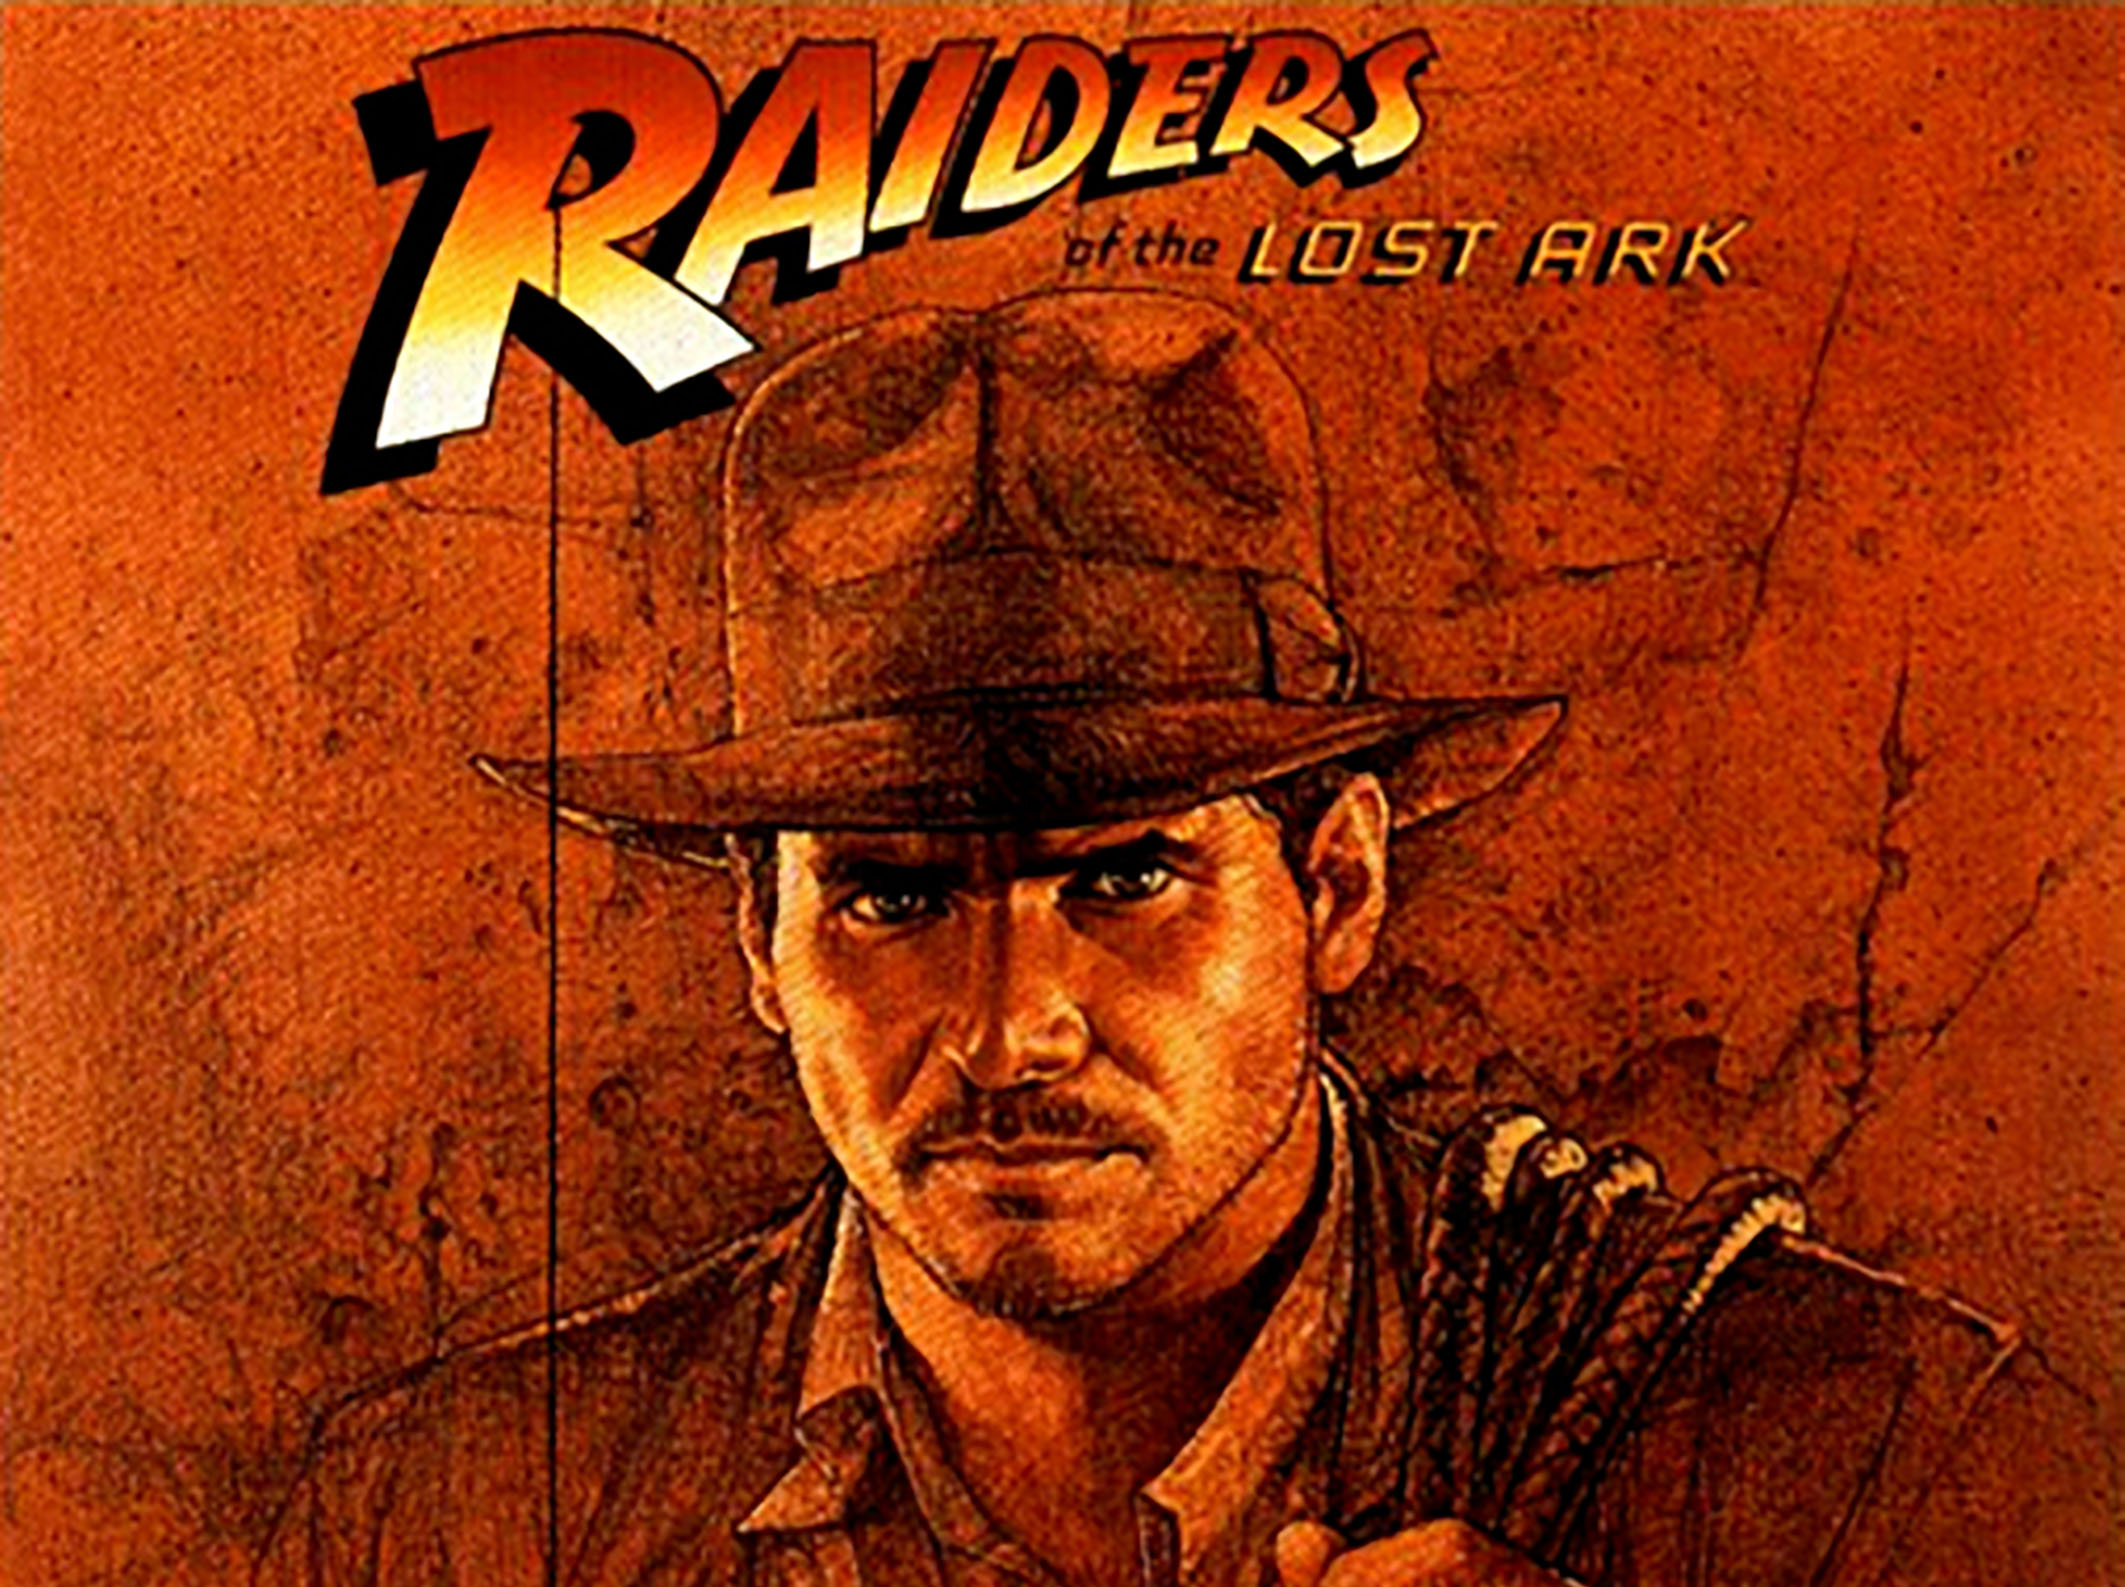 Raiders of the Lost Ark stars Harrison Ford.